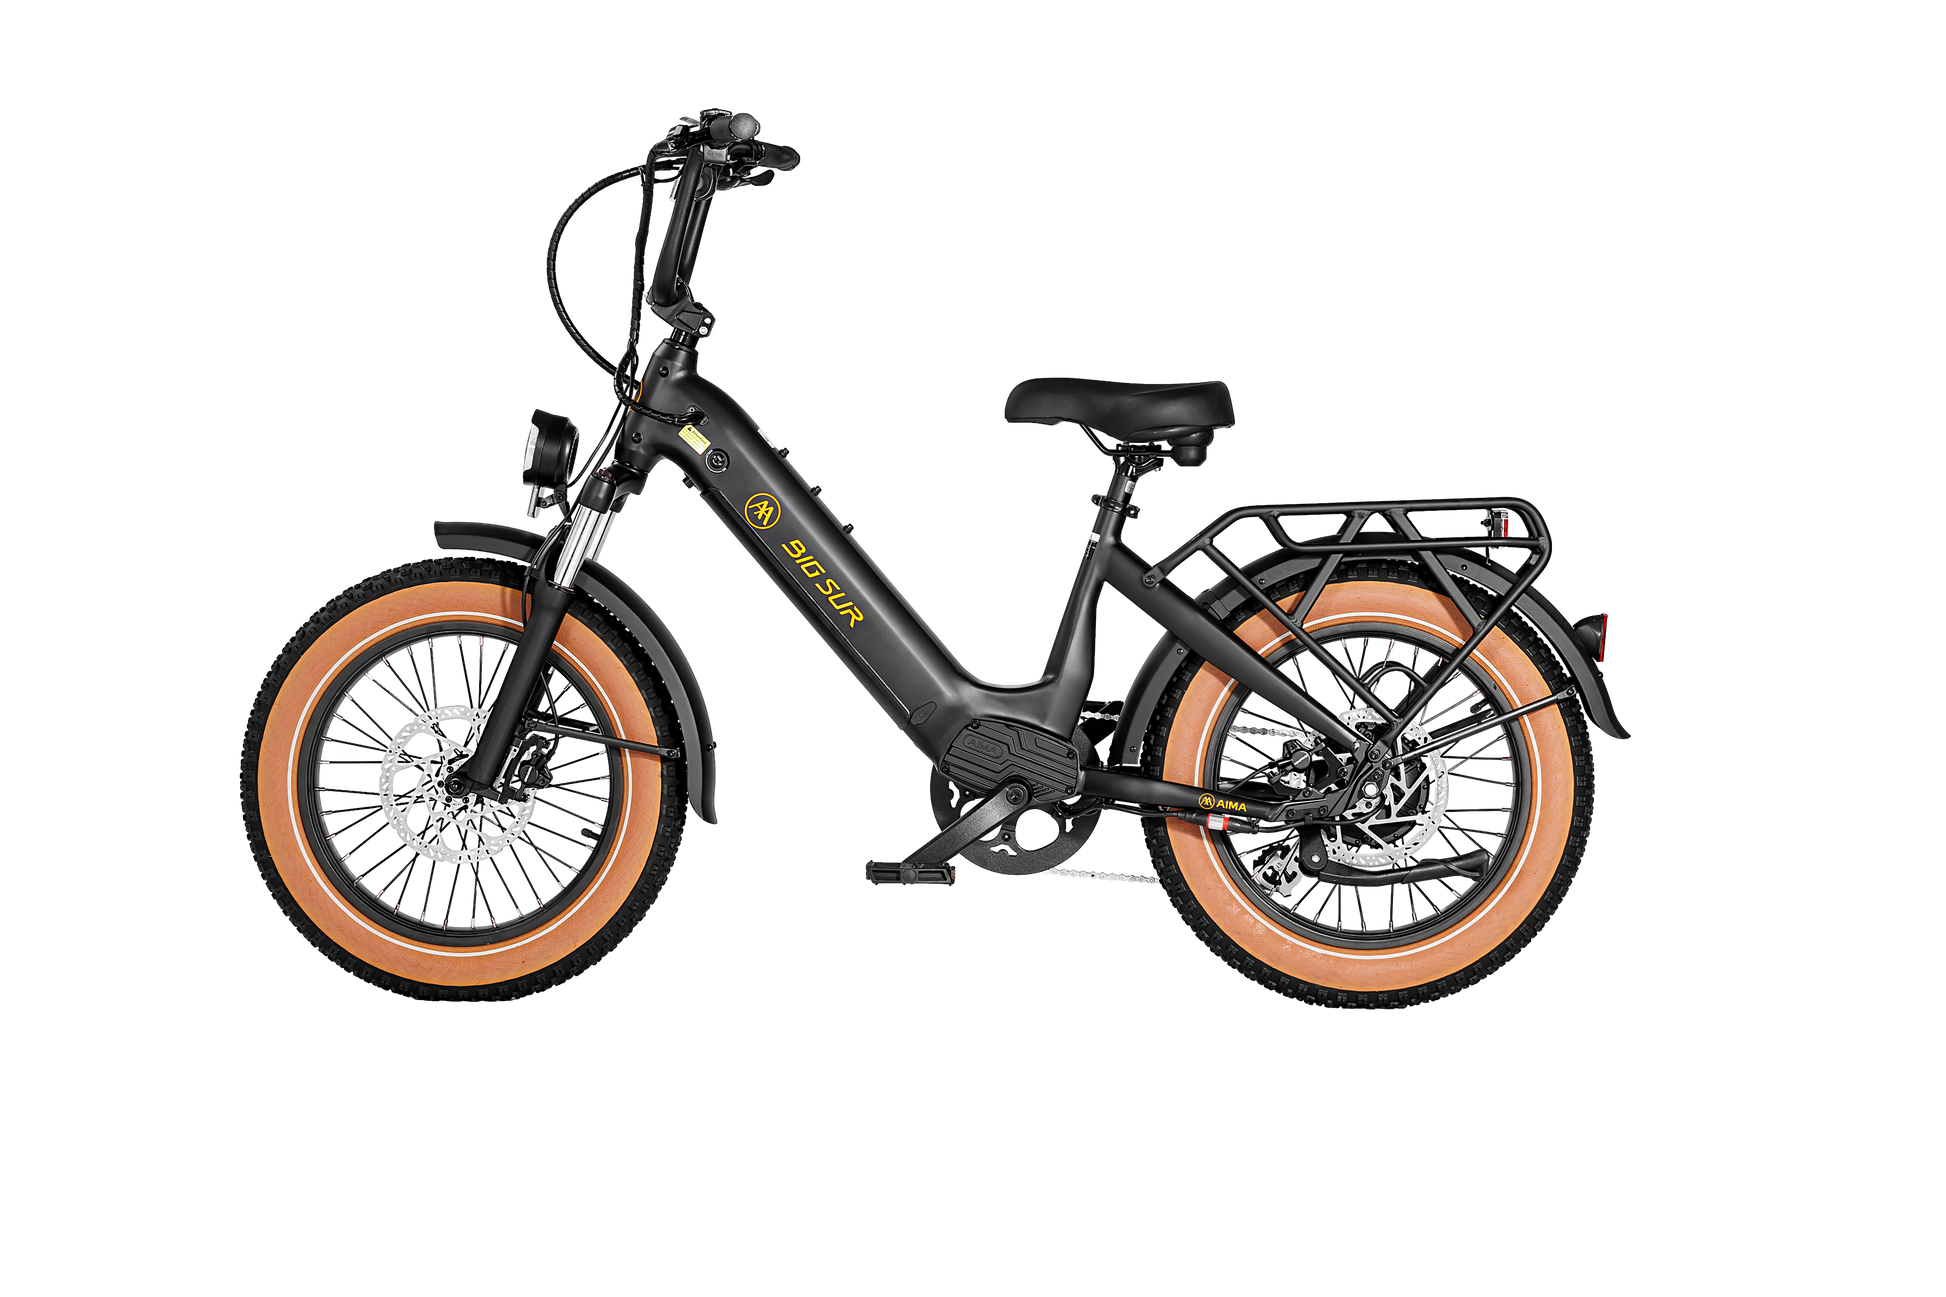 Electric bike with a black frame, orange wheel rims, fat tires, and a rear cargo rack. The brand name "AIMA" is visible on the frame, and it boasts UL2849 certification for safety. The product is called AIMA - Big Sur Sport.